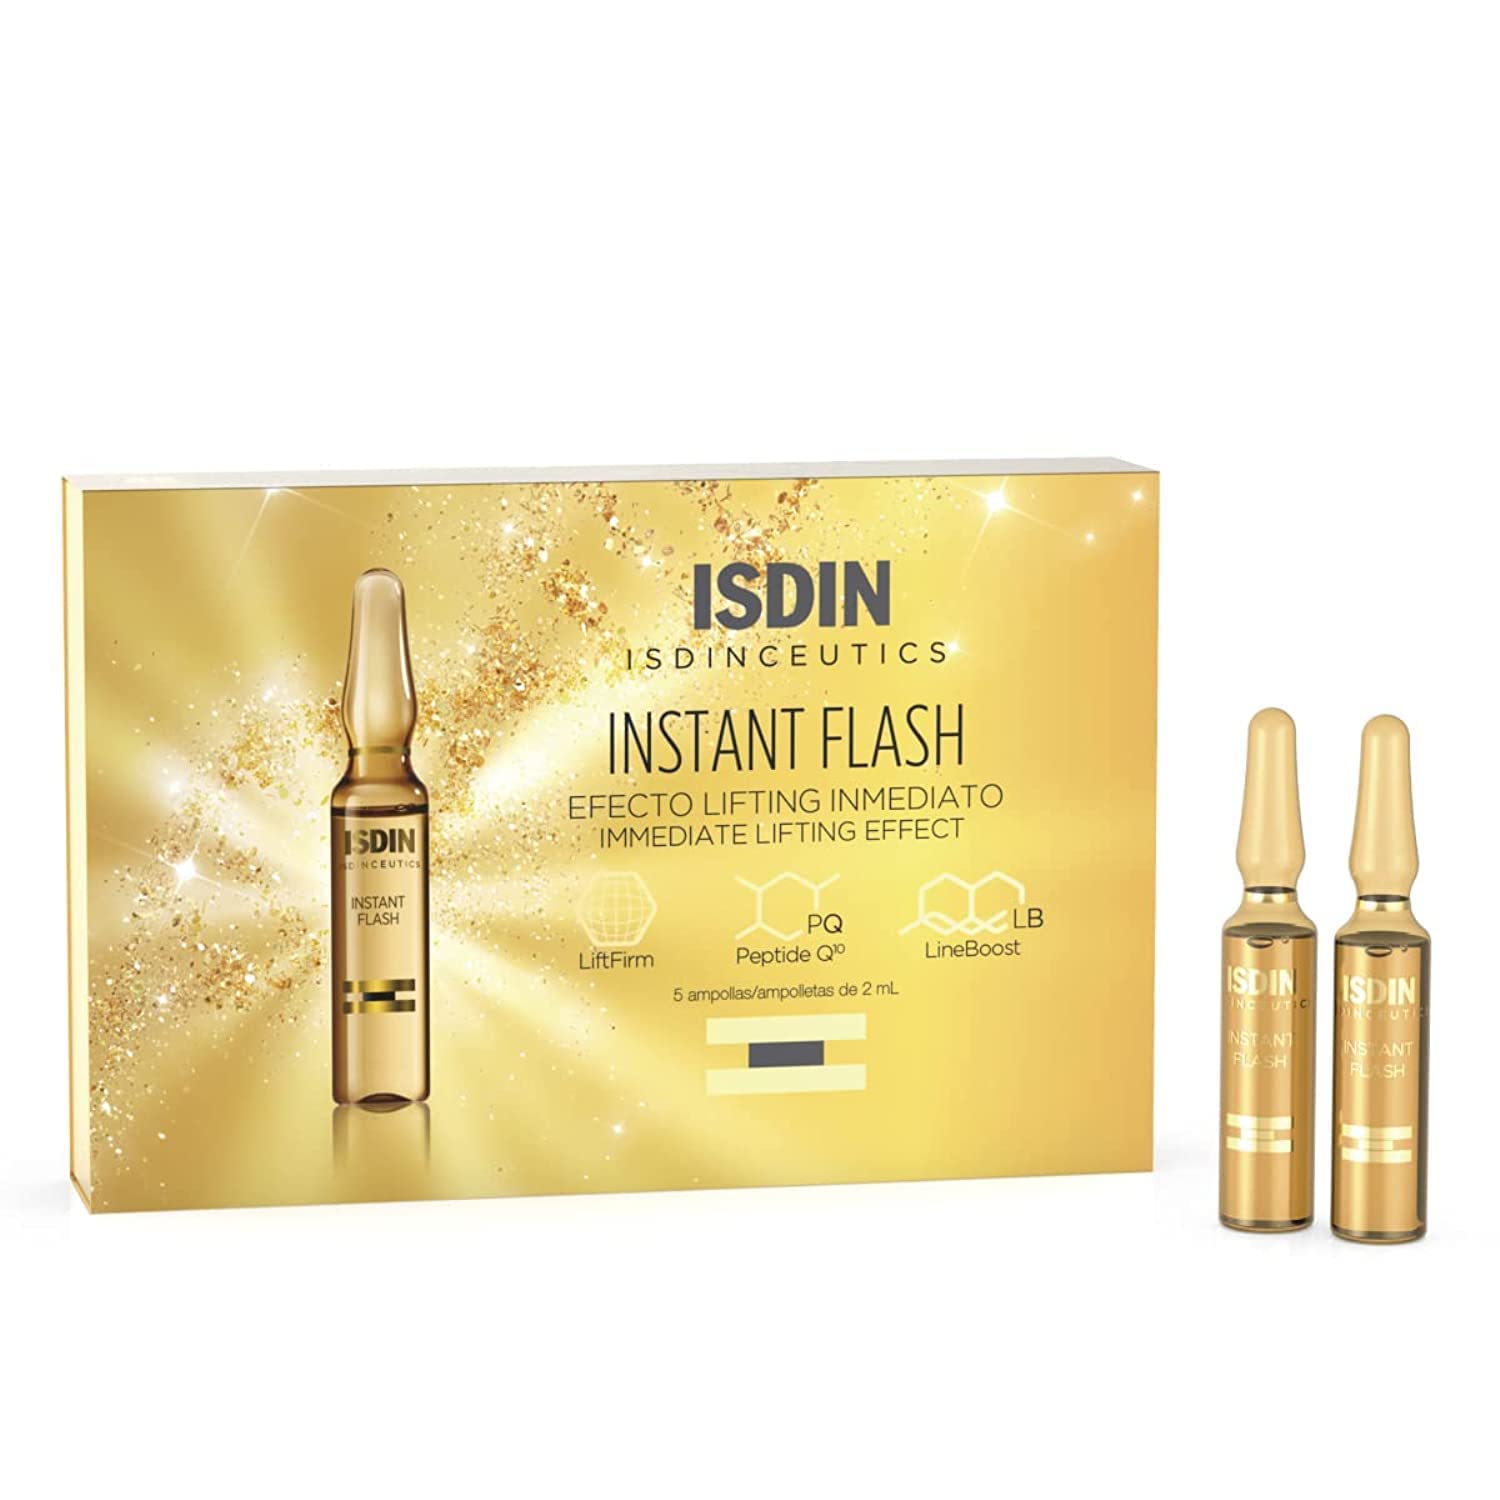 ISDIN Isdinceutics Instant ash Firming and Lifting Serum for Face with Antioxidants and Hyaluronic Acid - 5 ampoules, 0.06  x 5